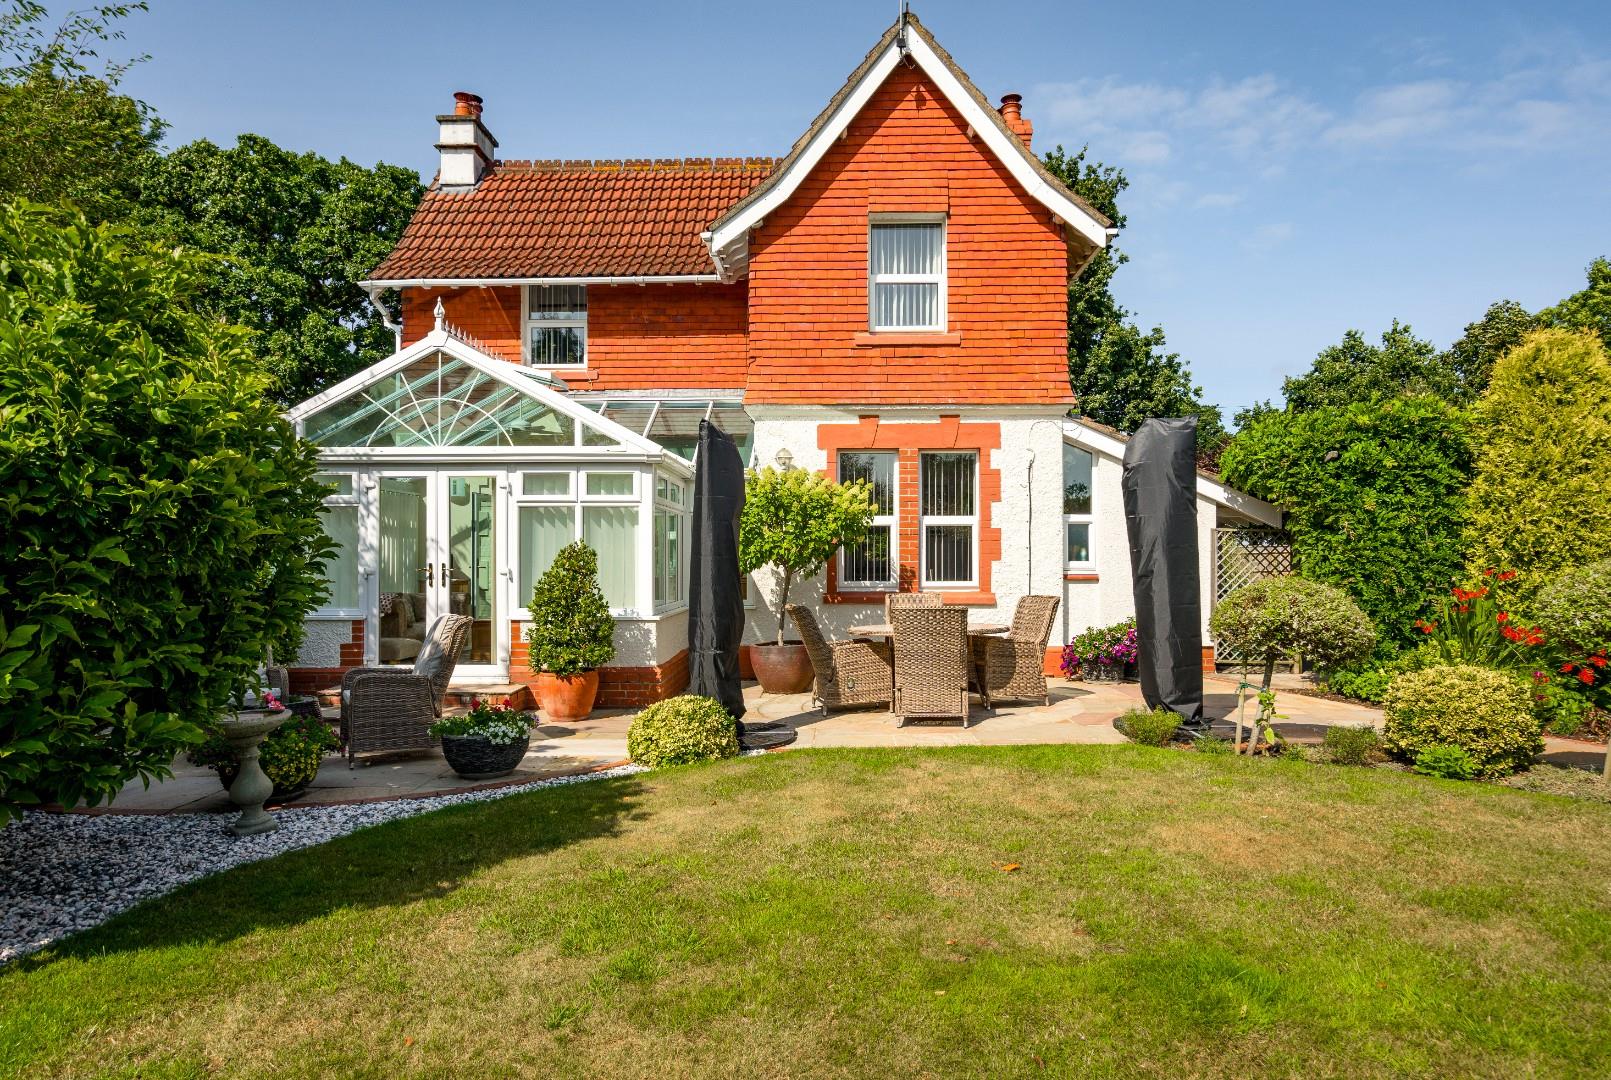 Edwardian residence situated within 0.8 of an acre on the fringes of Claverham